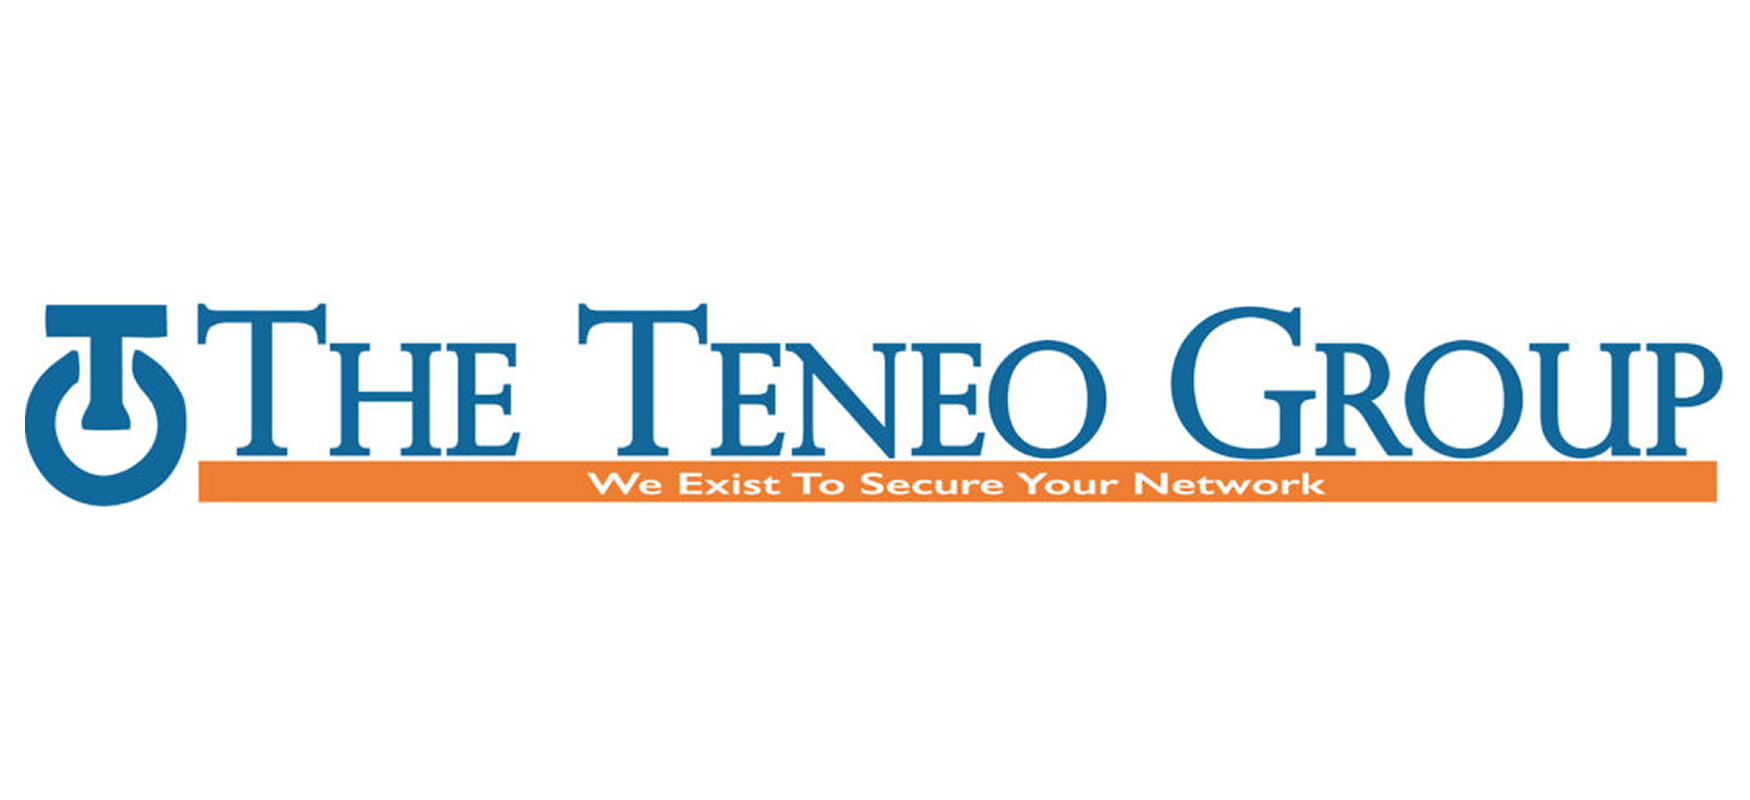 The Teneo Group